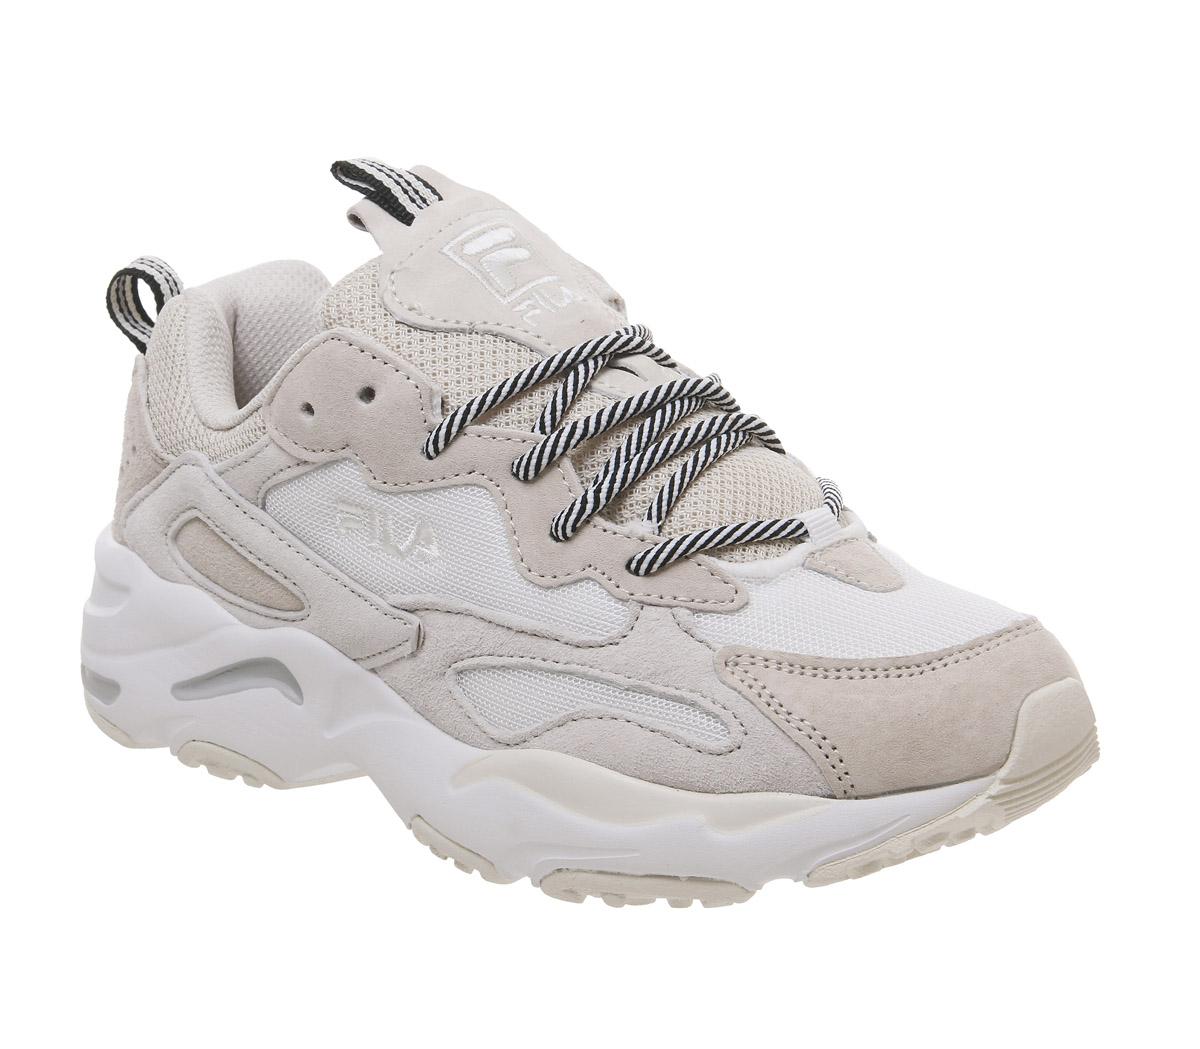 Legitim Tænke Abundantly fila tracer whiteLimited Special Sales and Special Offers – Women's & Men's  Sneakers & Sports Shoes - Shop Athletic Shoes Online > OFF-55% Free  Shipping & Fast Shippment!